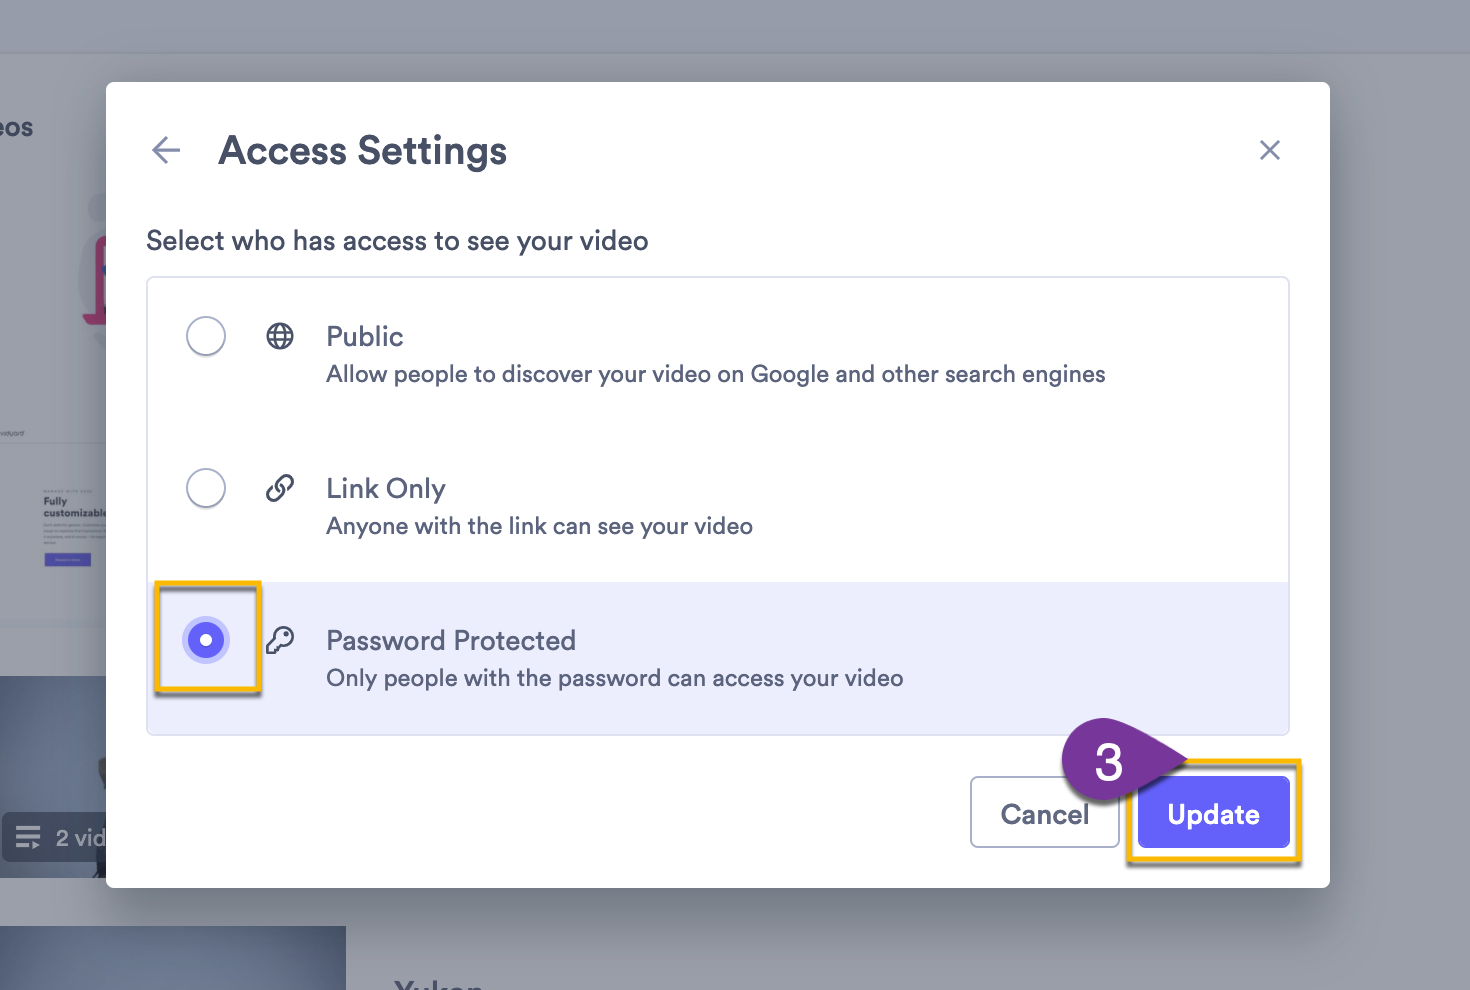 Selecting Password Protected as the video access setting